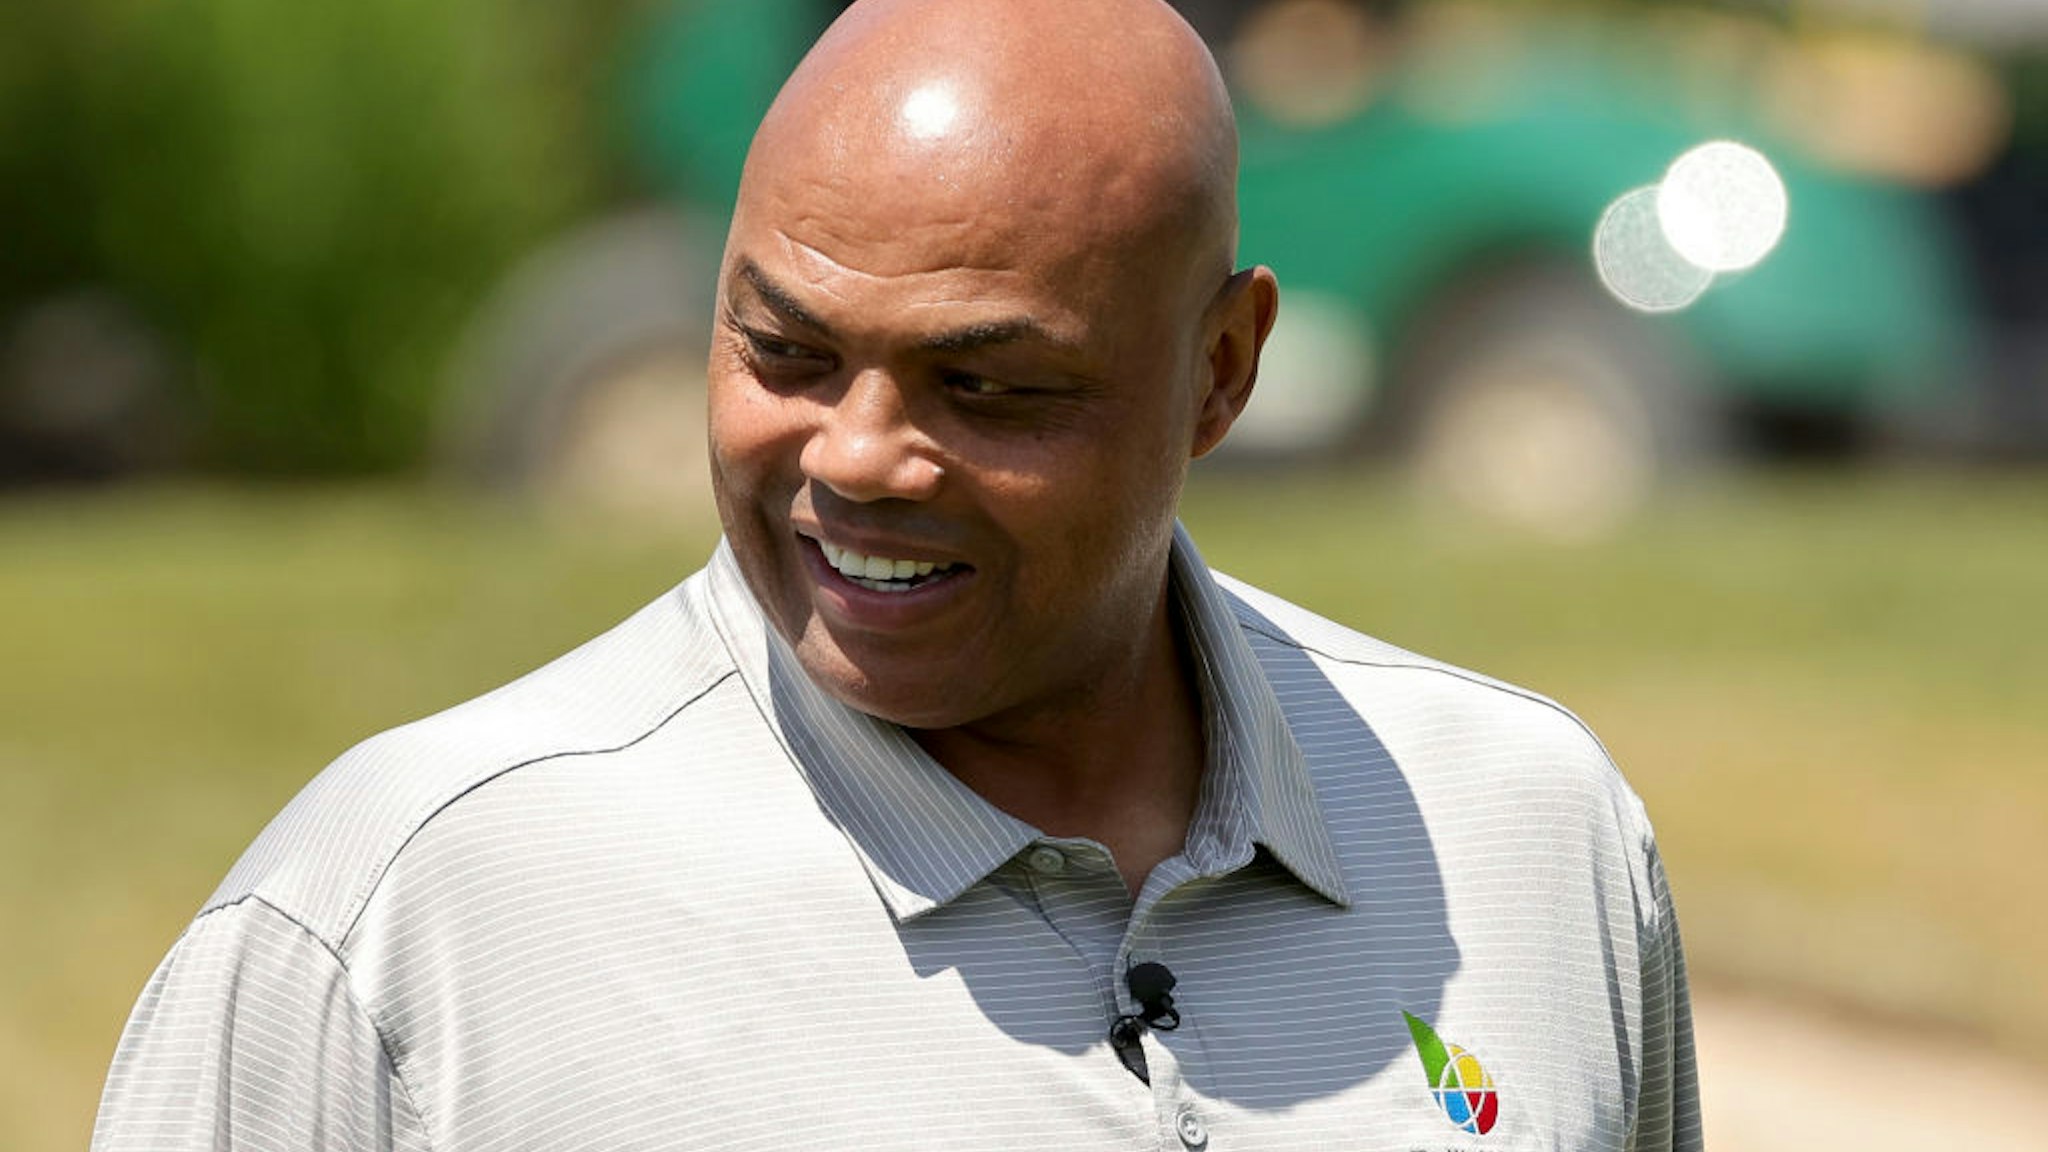 BIG SKY, MONTANA - JULY 06: Charles Barkley looks on during Capital One's The Match at The Reserve at Moonlight Basin on July 06, 2021 in Big Sky, Montana. (Photo by Stacy Revere/Getty Images for The Match)